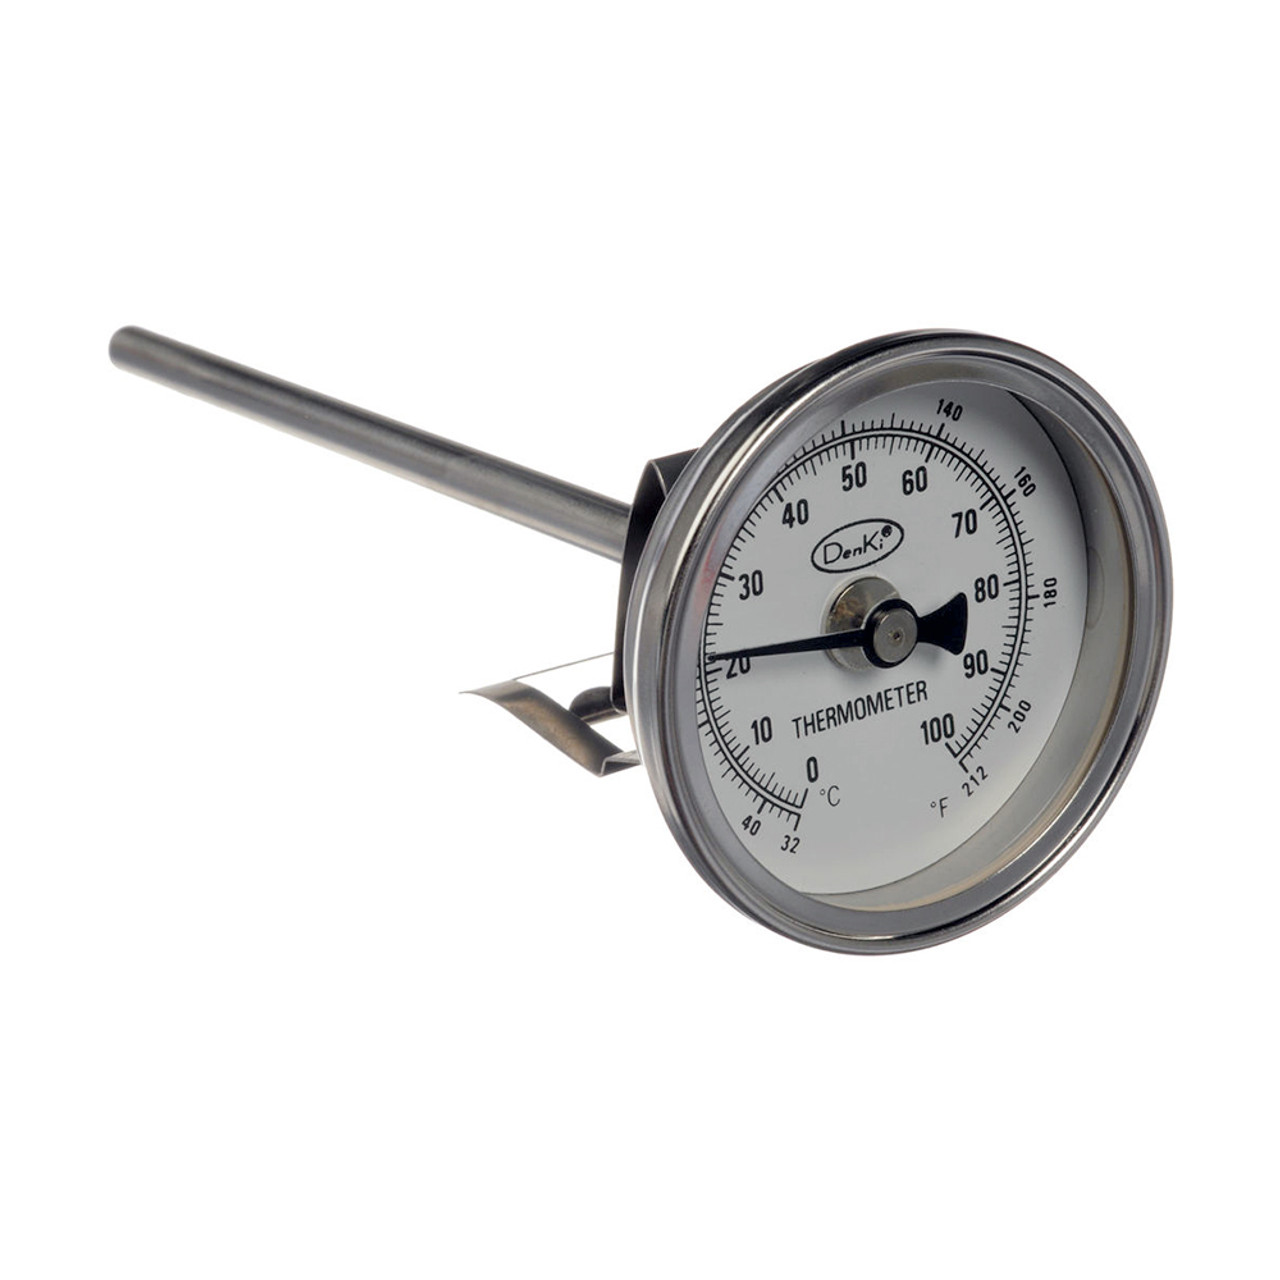 2 INCH DIAL THERMOMETER